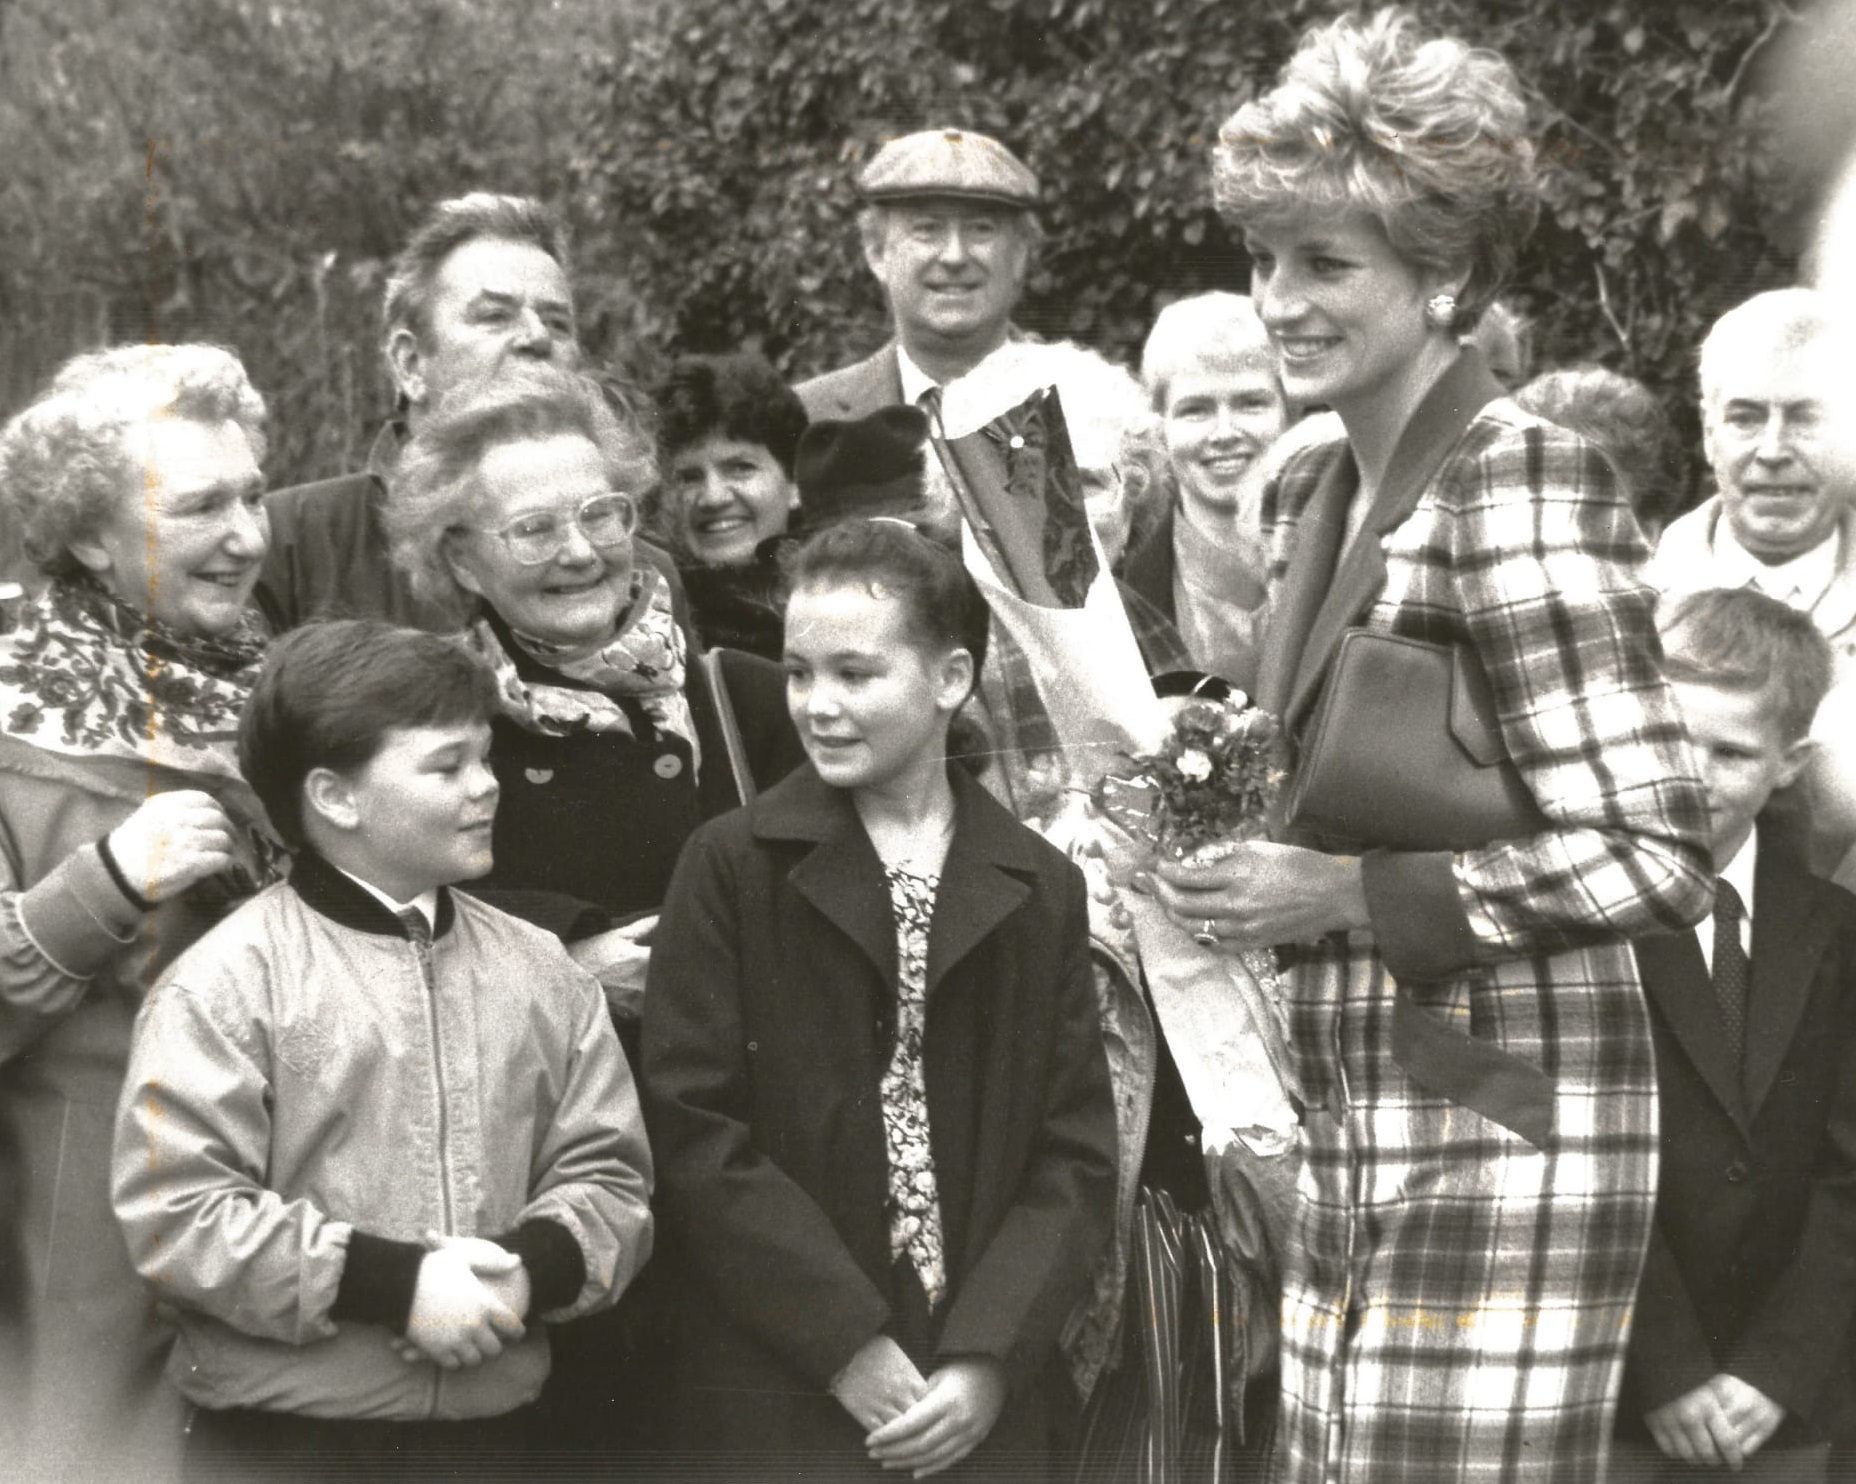 Dan and Jenny Gillespie pictured with Diana, Princess of Wales at the opening of Francis House in 1991.